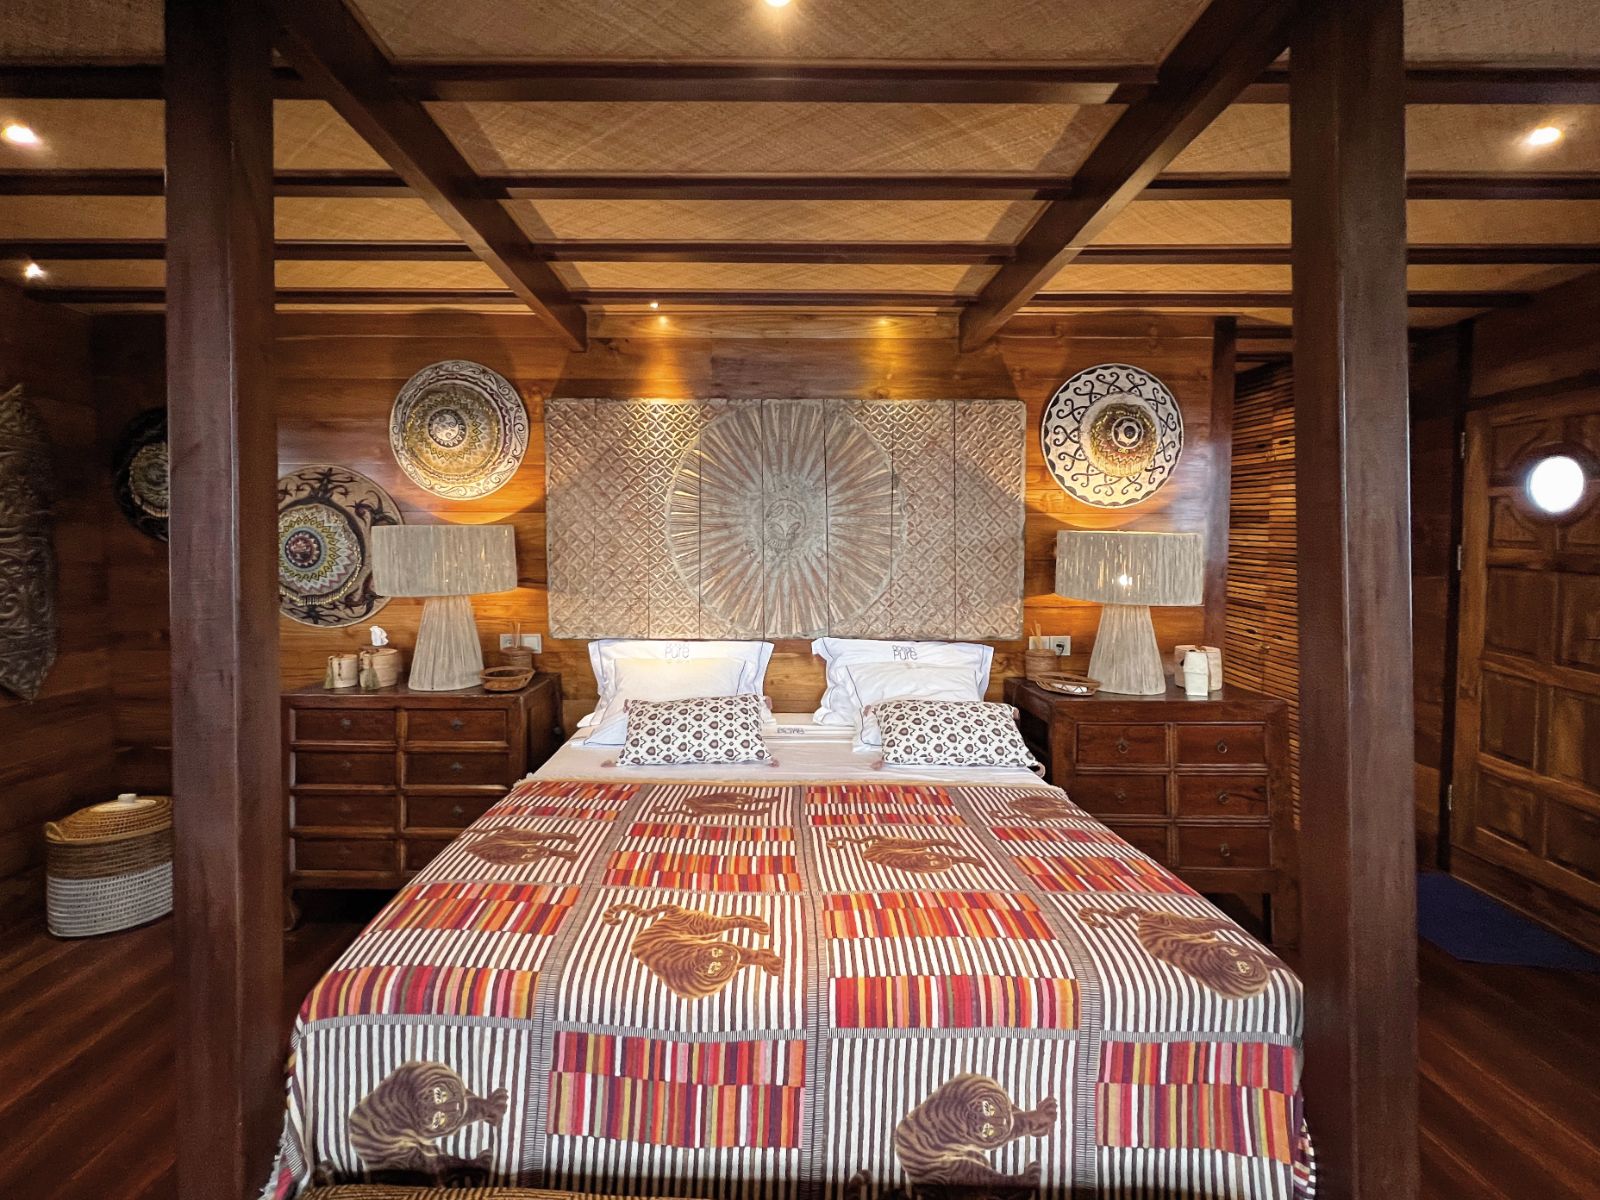 master bedroom onboard the Ocean Pure phinsi in Indonesia